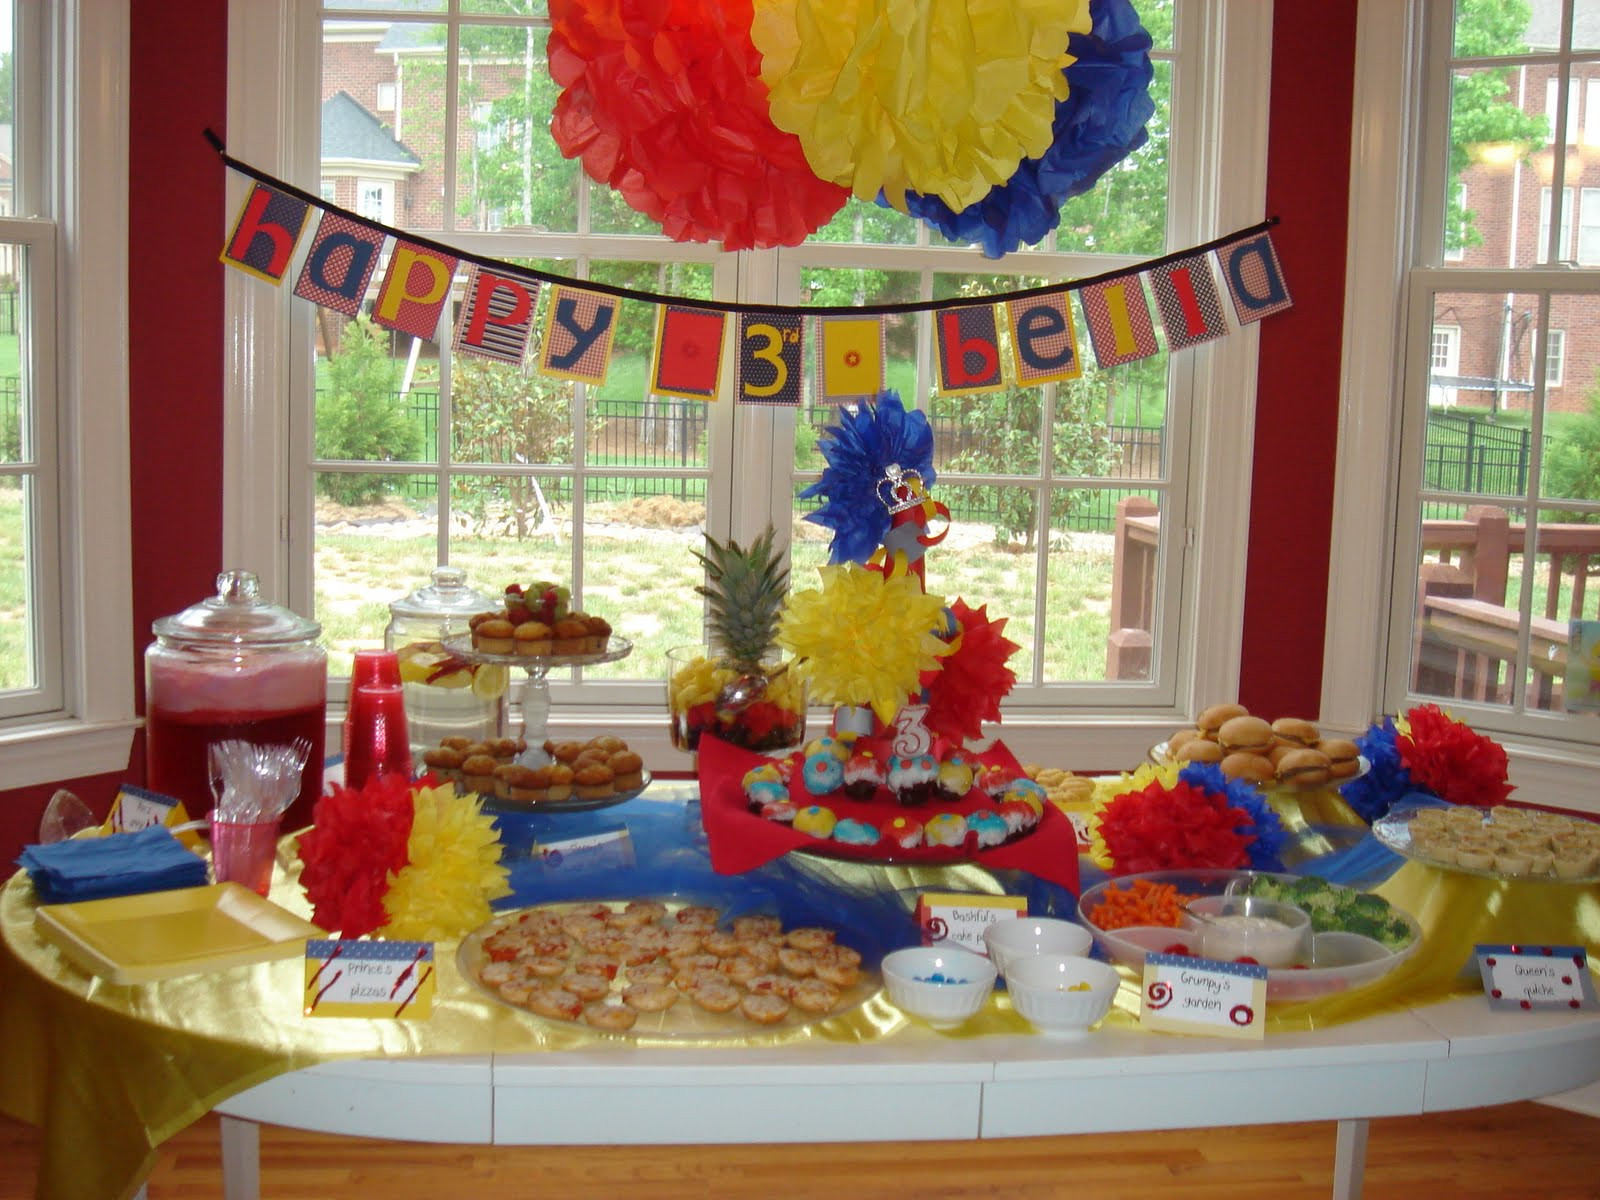 Snow White Party Ideas Food
 Everyday is a "Hollyday" Snow White Party